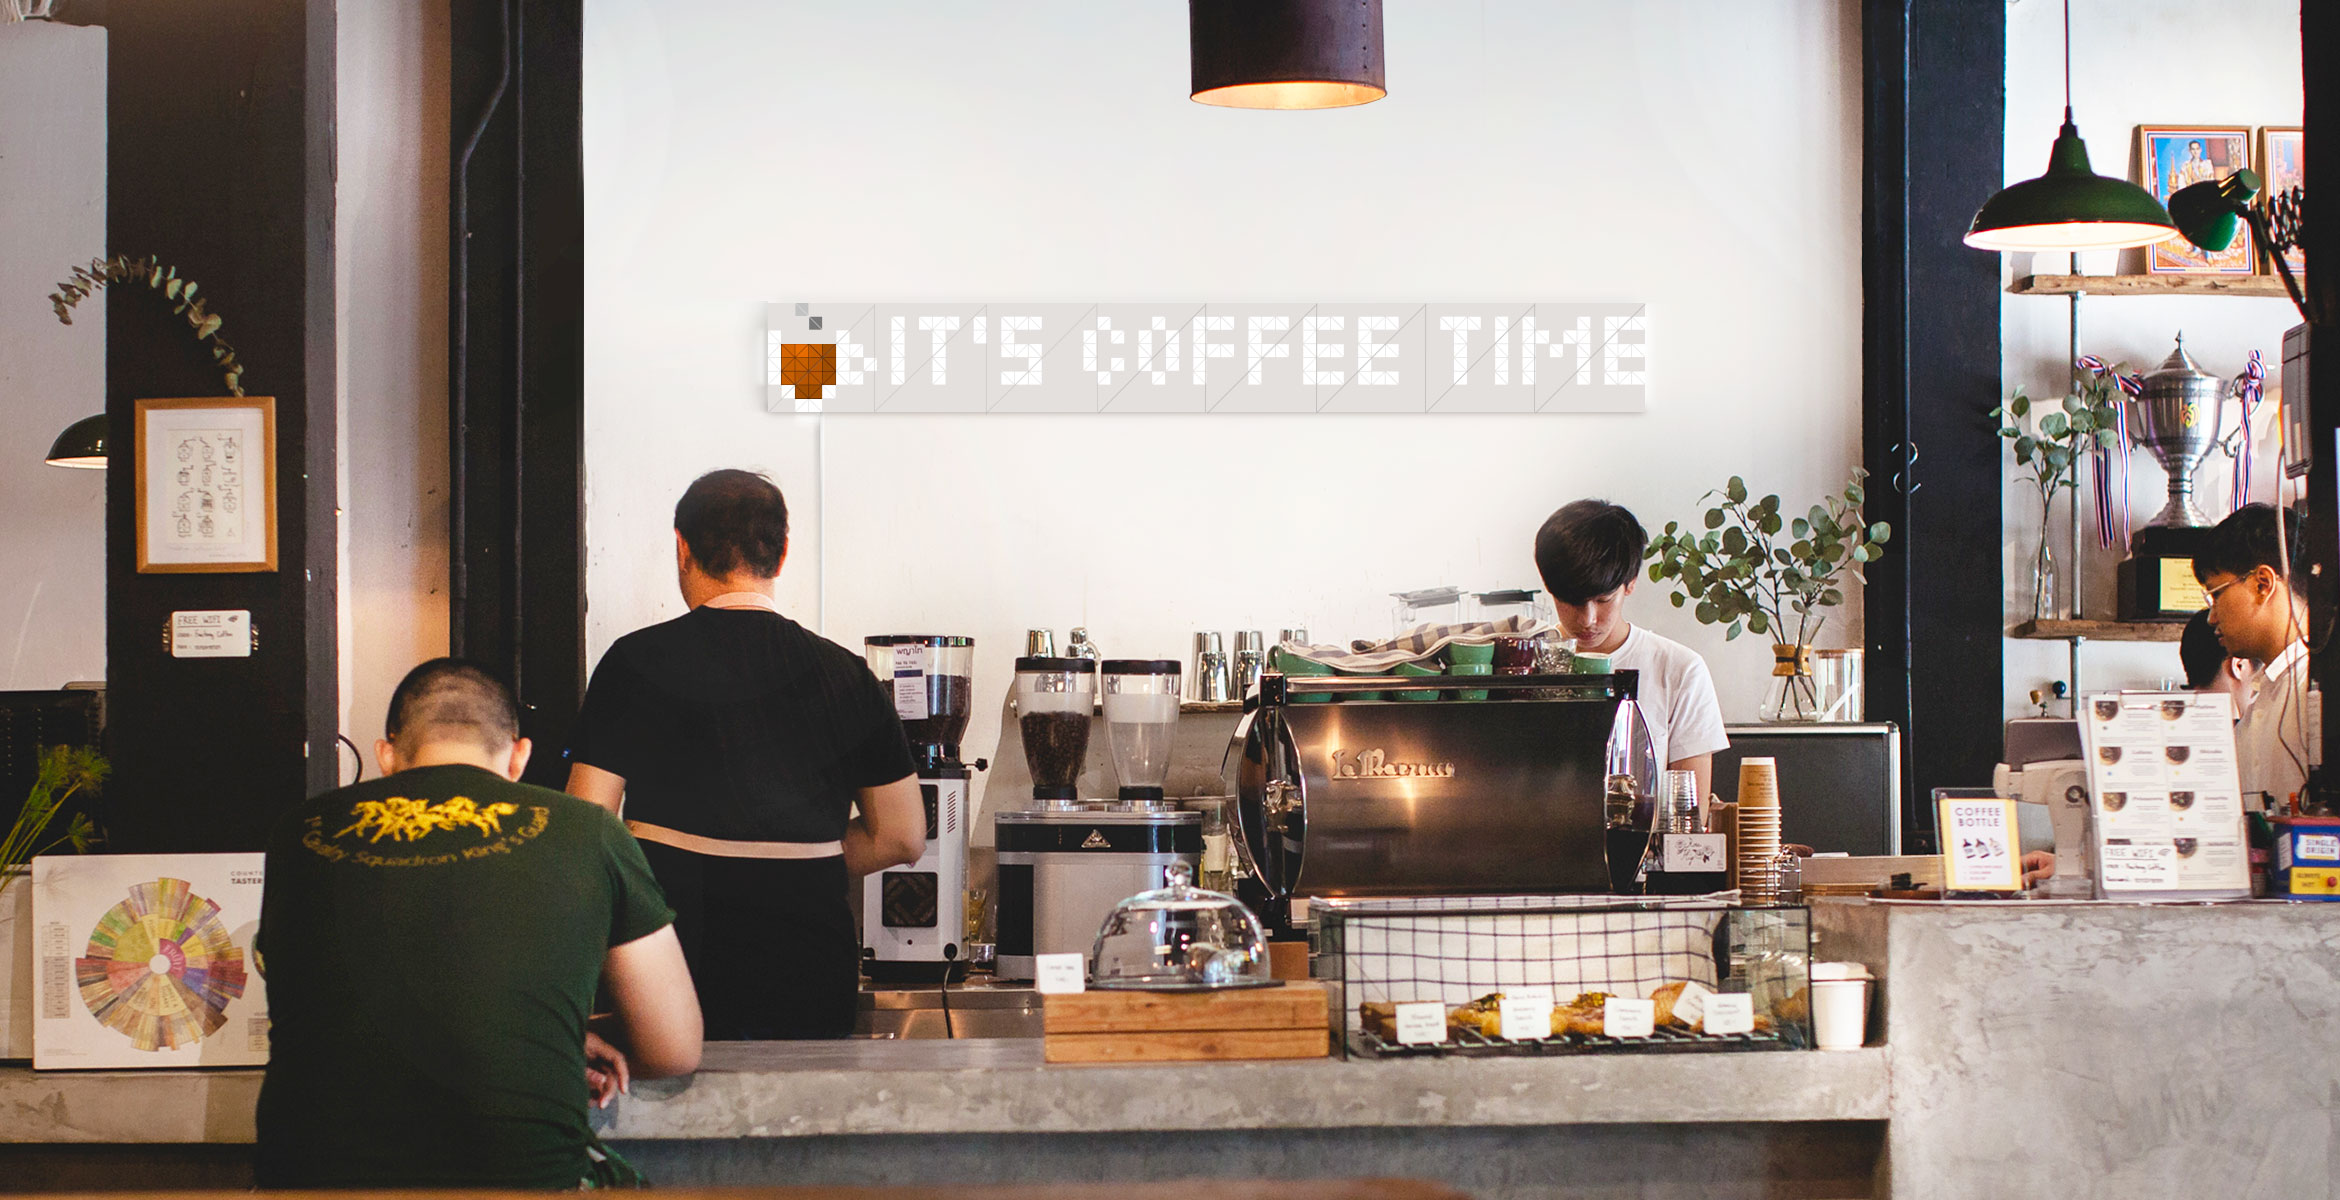 Infoscreen, assembled from 16 smart light surfaces, complements cafe interior and displays a message "It's coffee time"